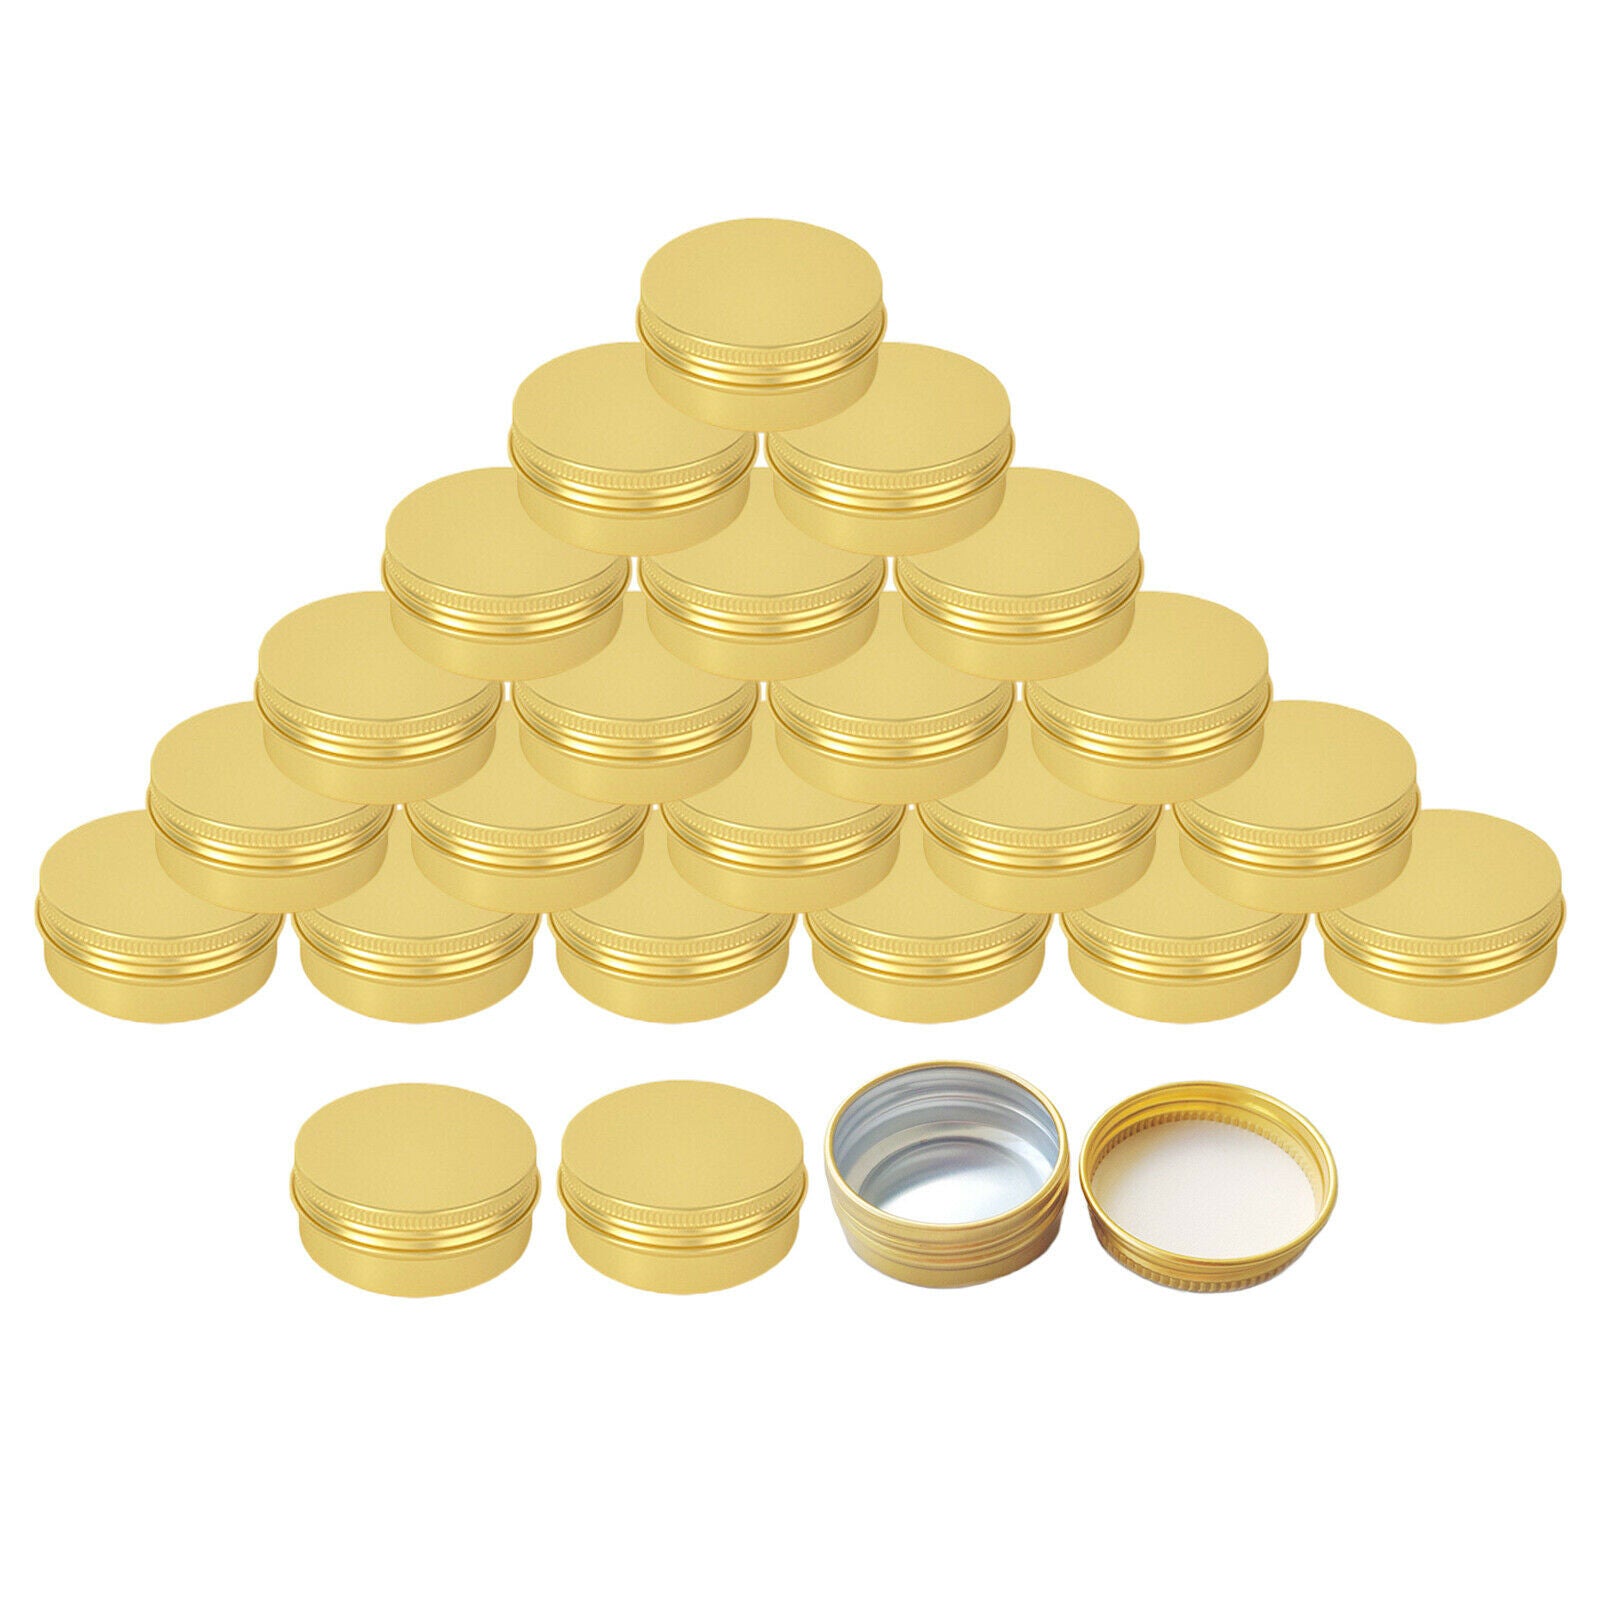 24x 15ml Golden Travel Empty Tin Cans Screw Top Round Aluminum Containers